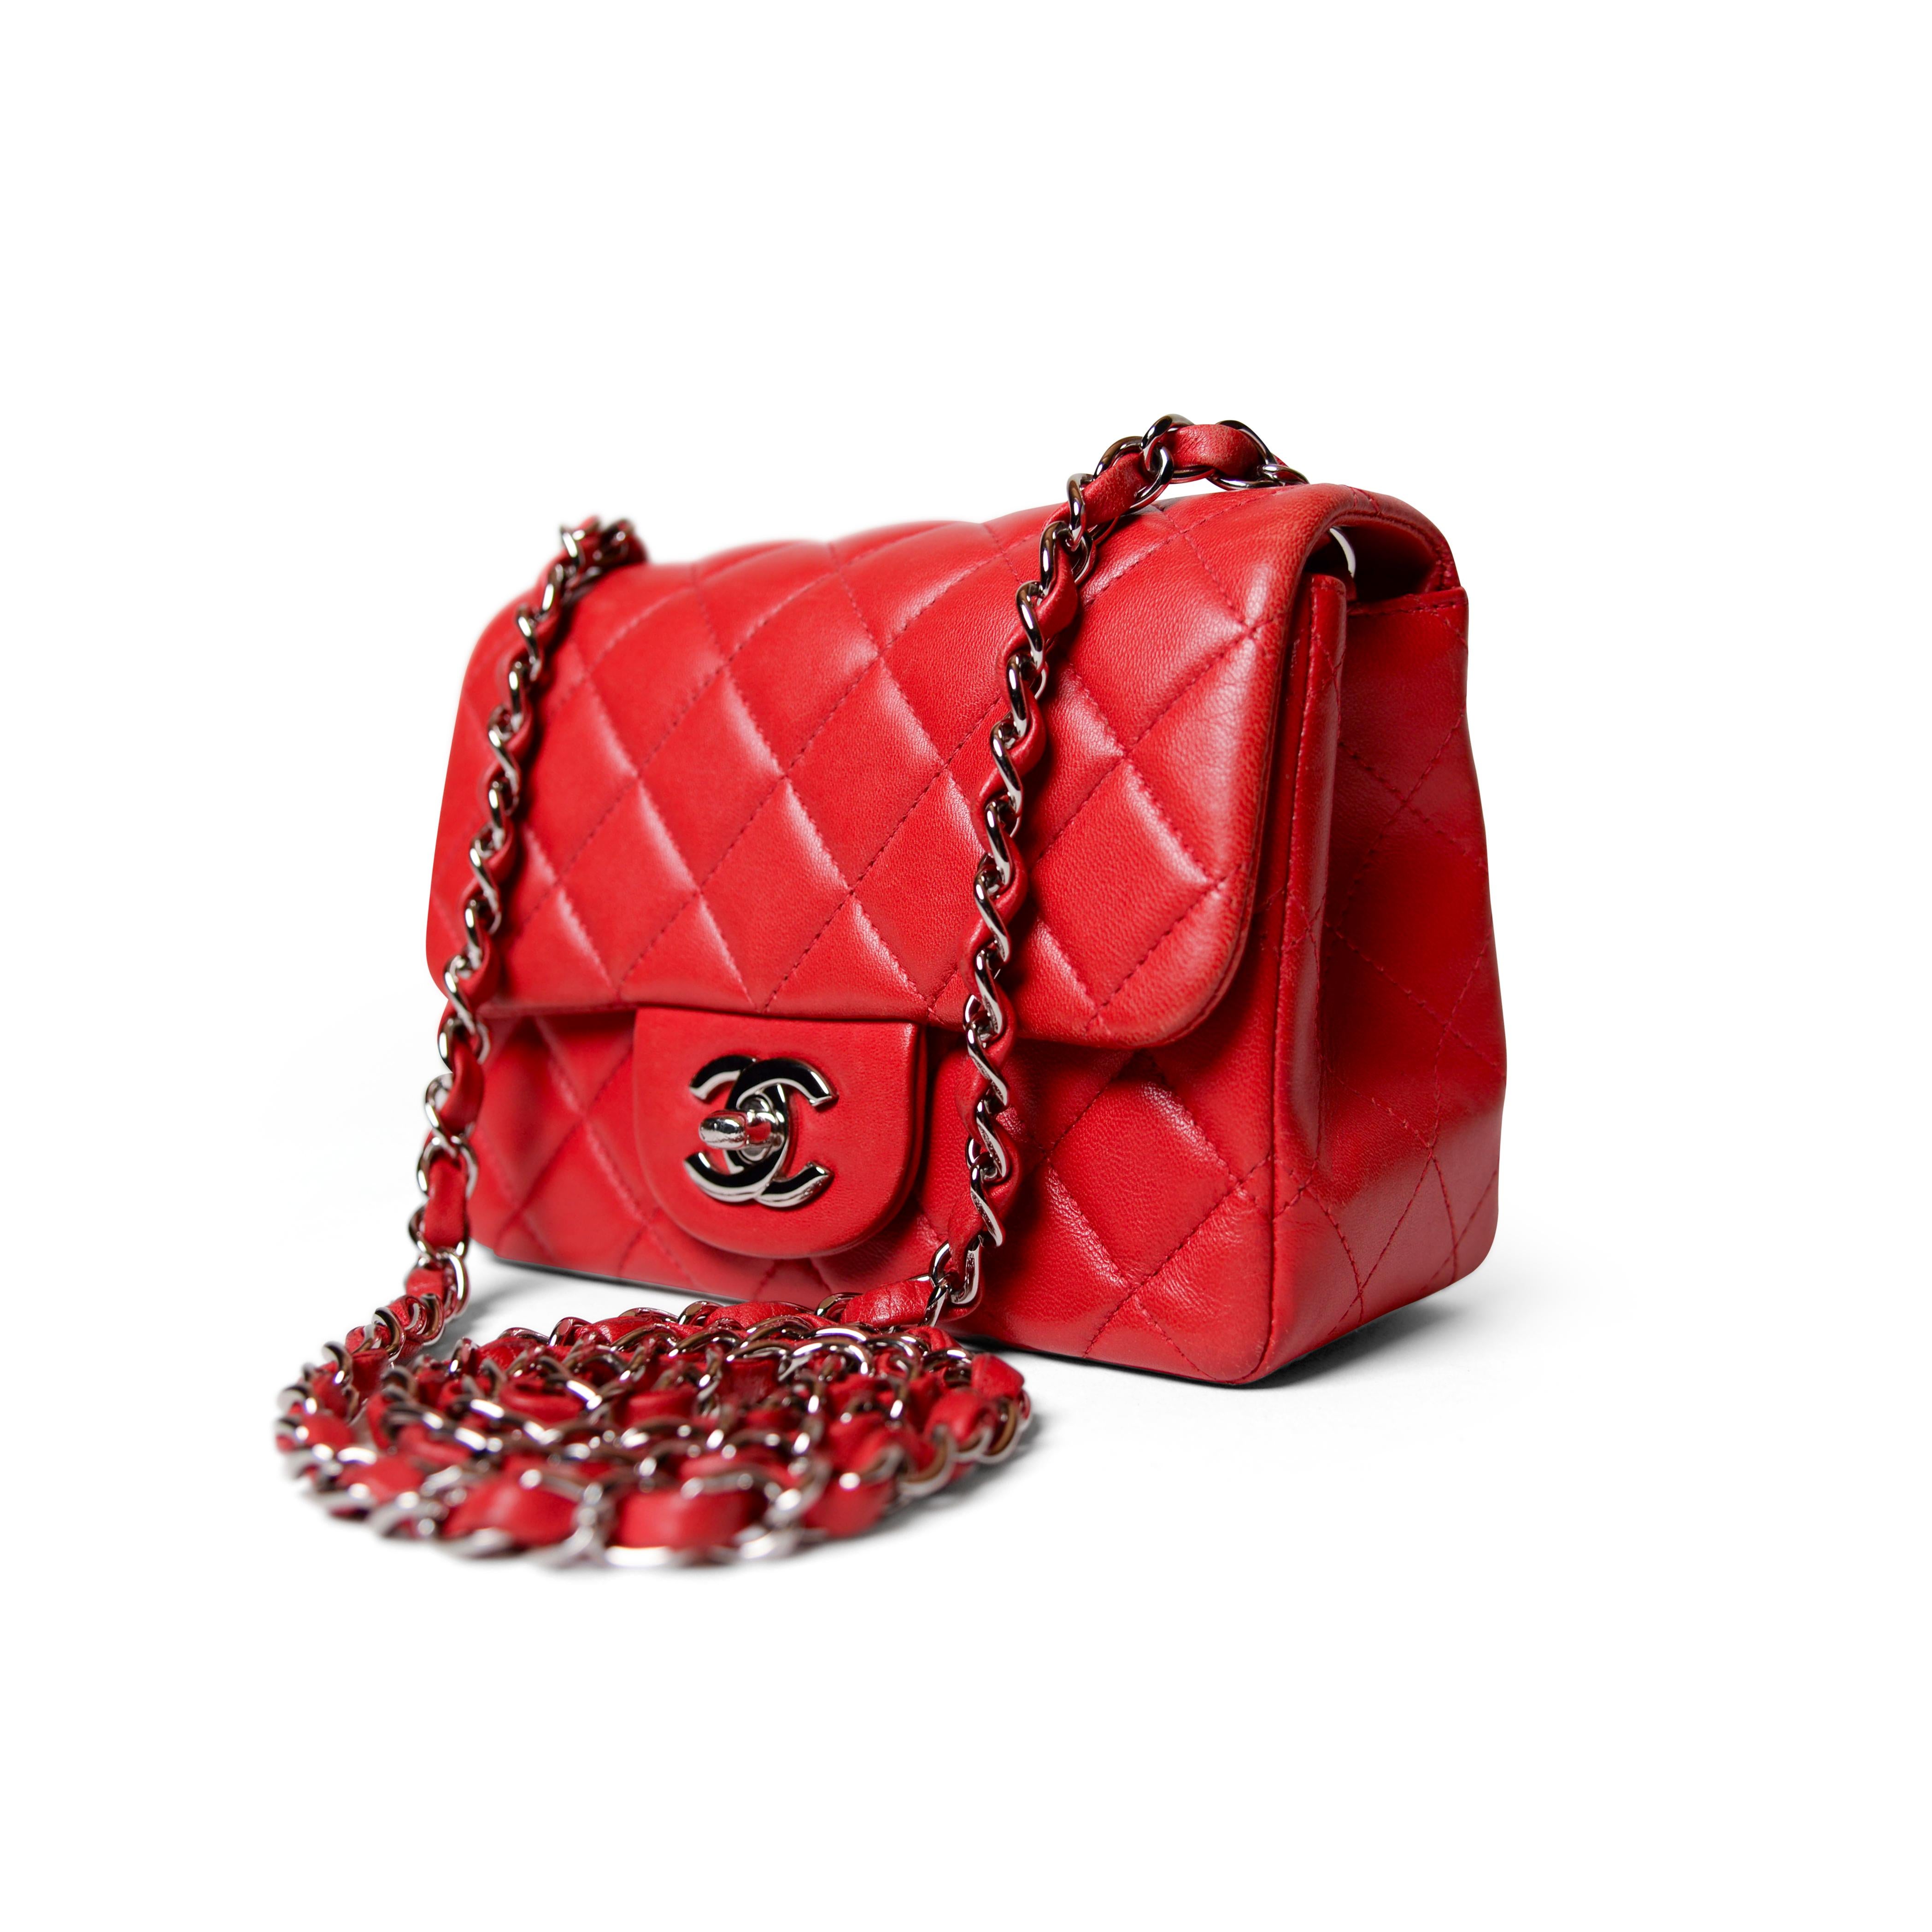 Chanel Red Quilted Lambskin Leather Mini Flap Bag 2